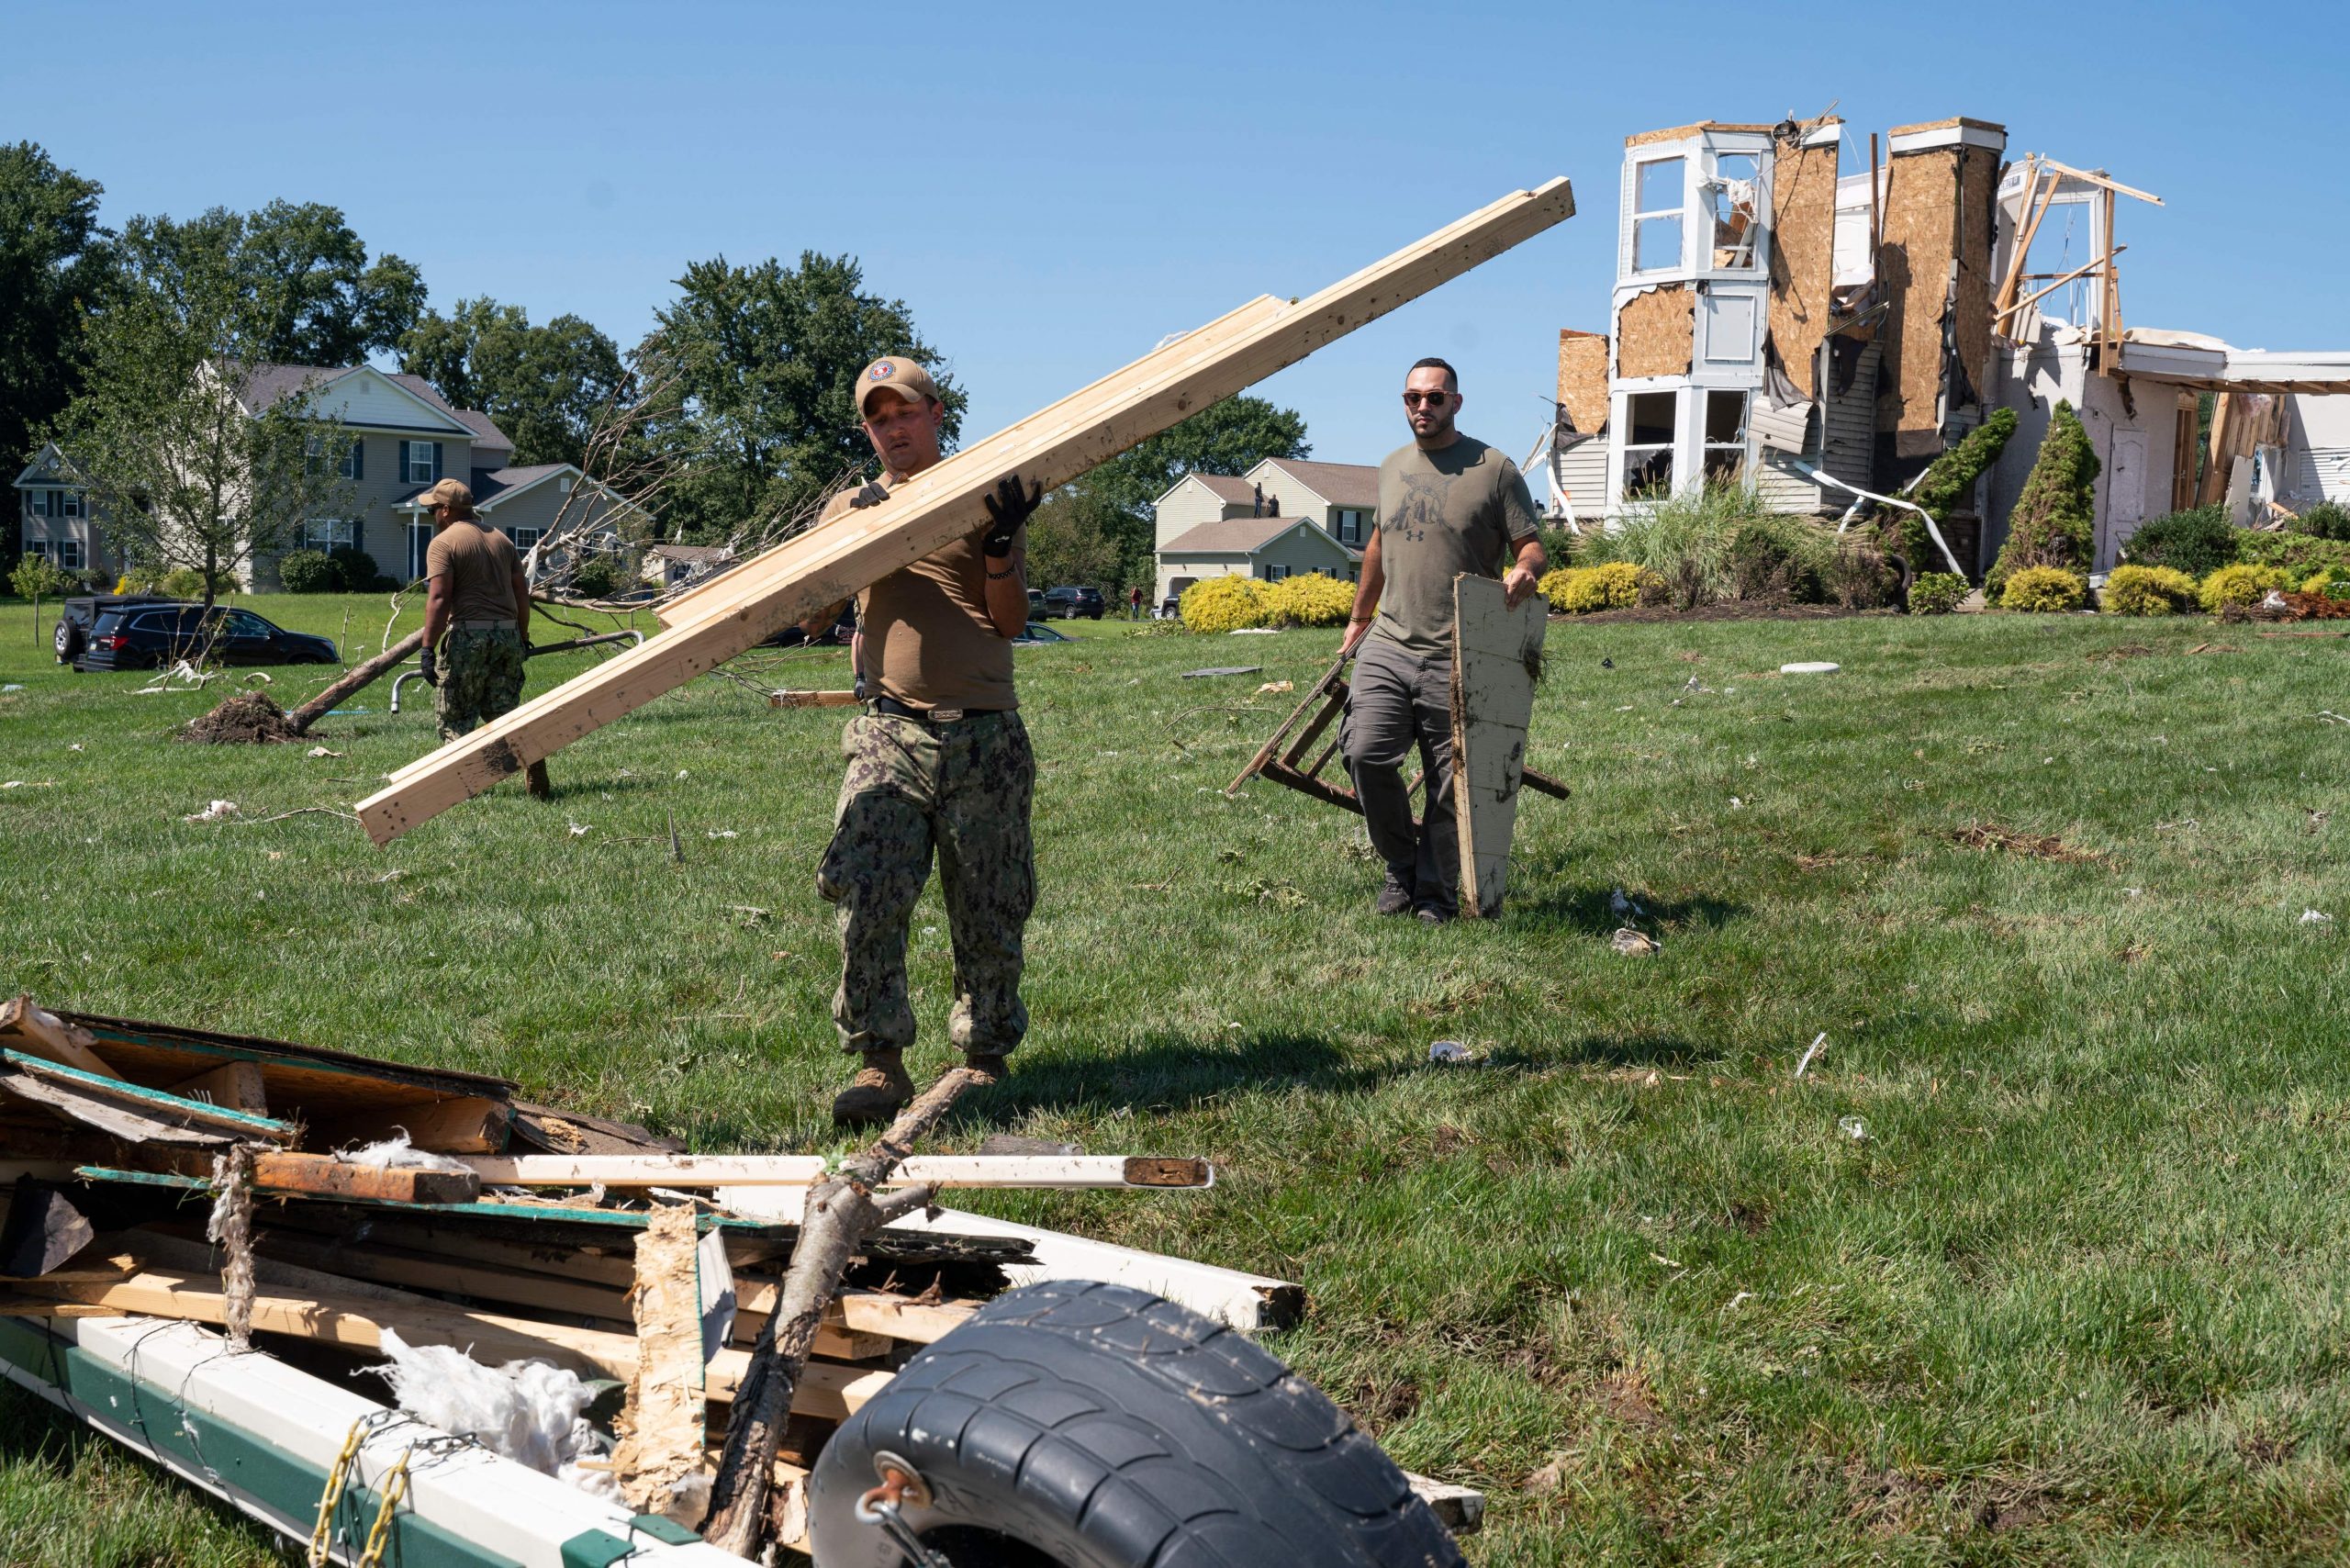 A group of Navy recruiters help clear debris from a house destroyed by a tornado in Mullica Hill, New Jersey after flash floods caused by Ida killed at least 14 people.